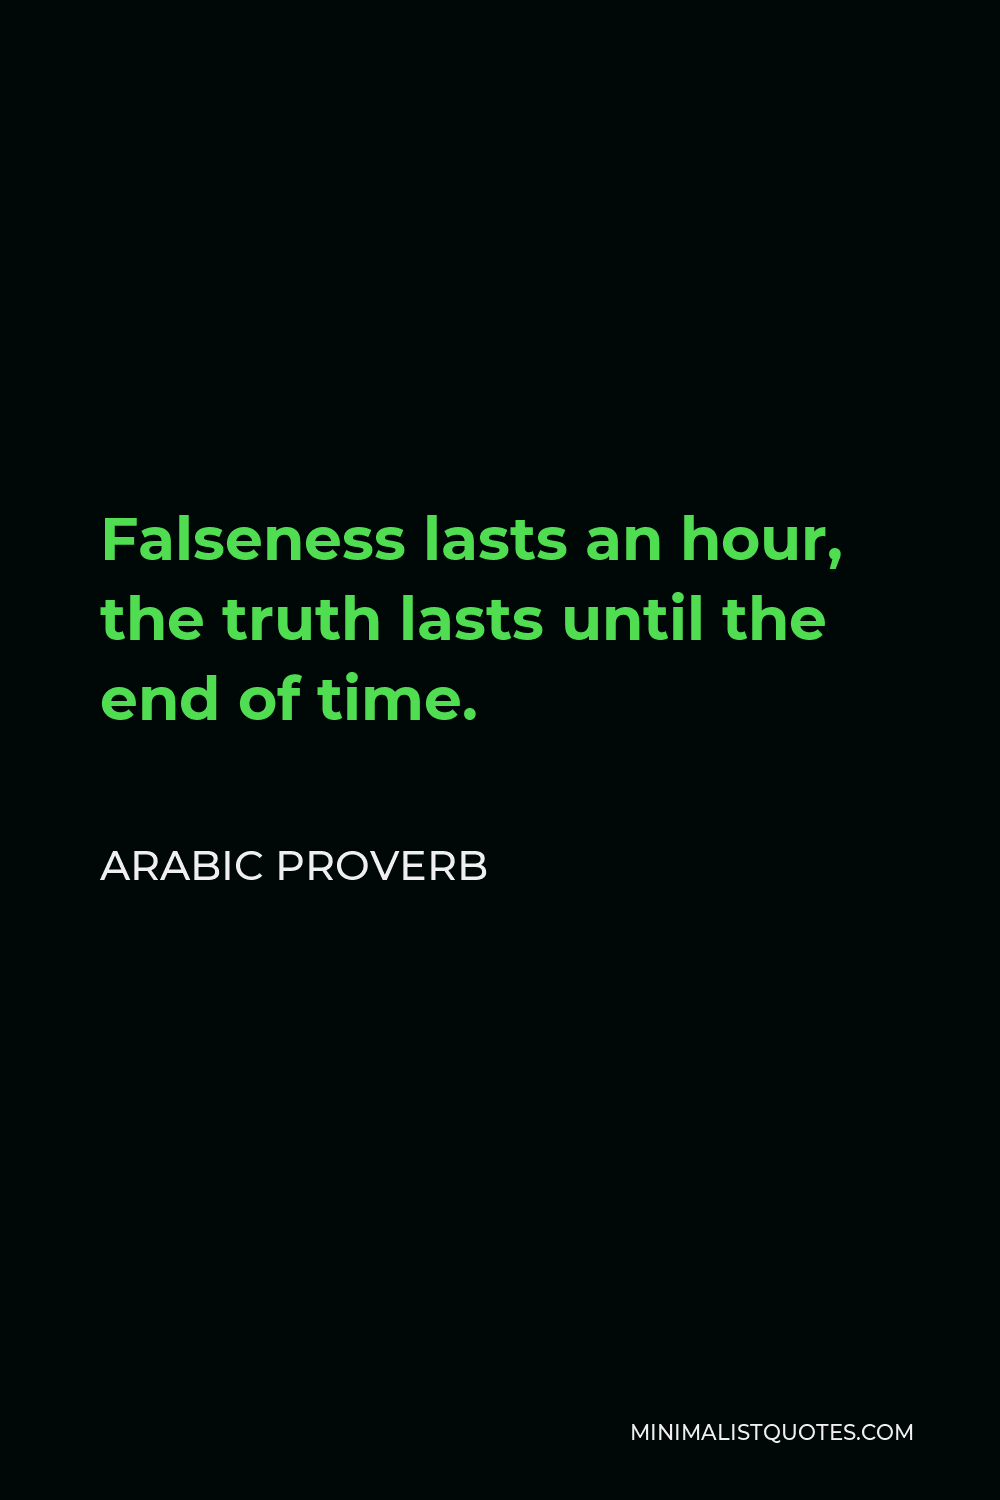 Arabic Proverb Quote - Falseness lasts an hour, the truth lasts until the end of time.